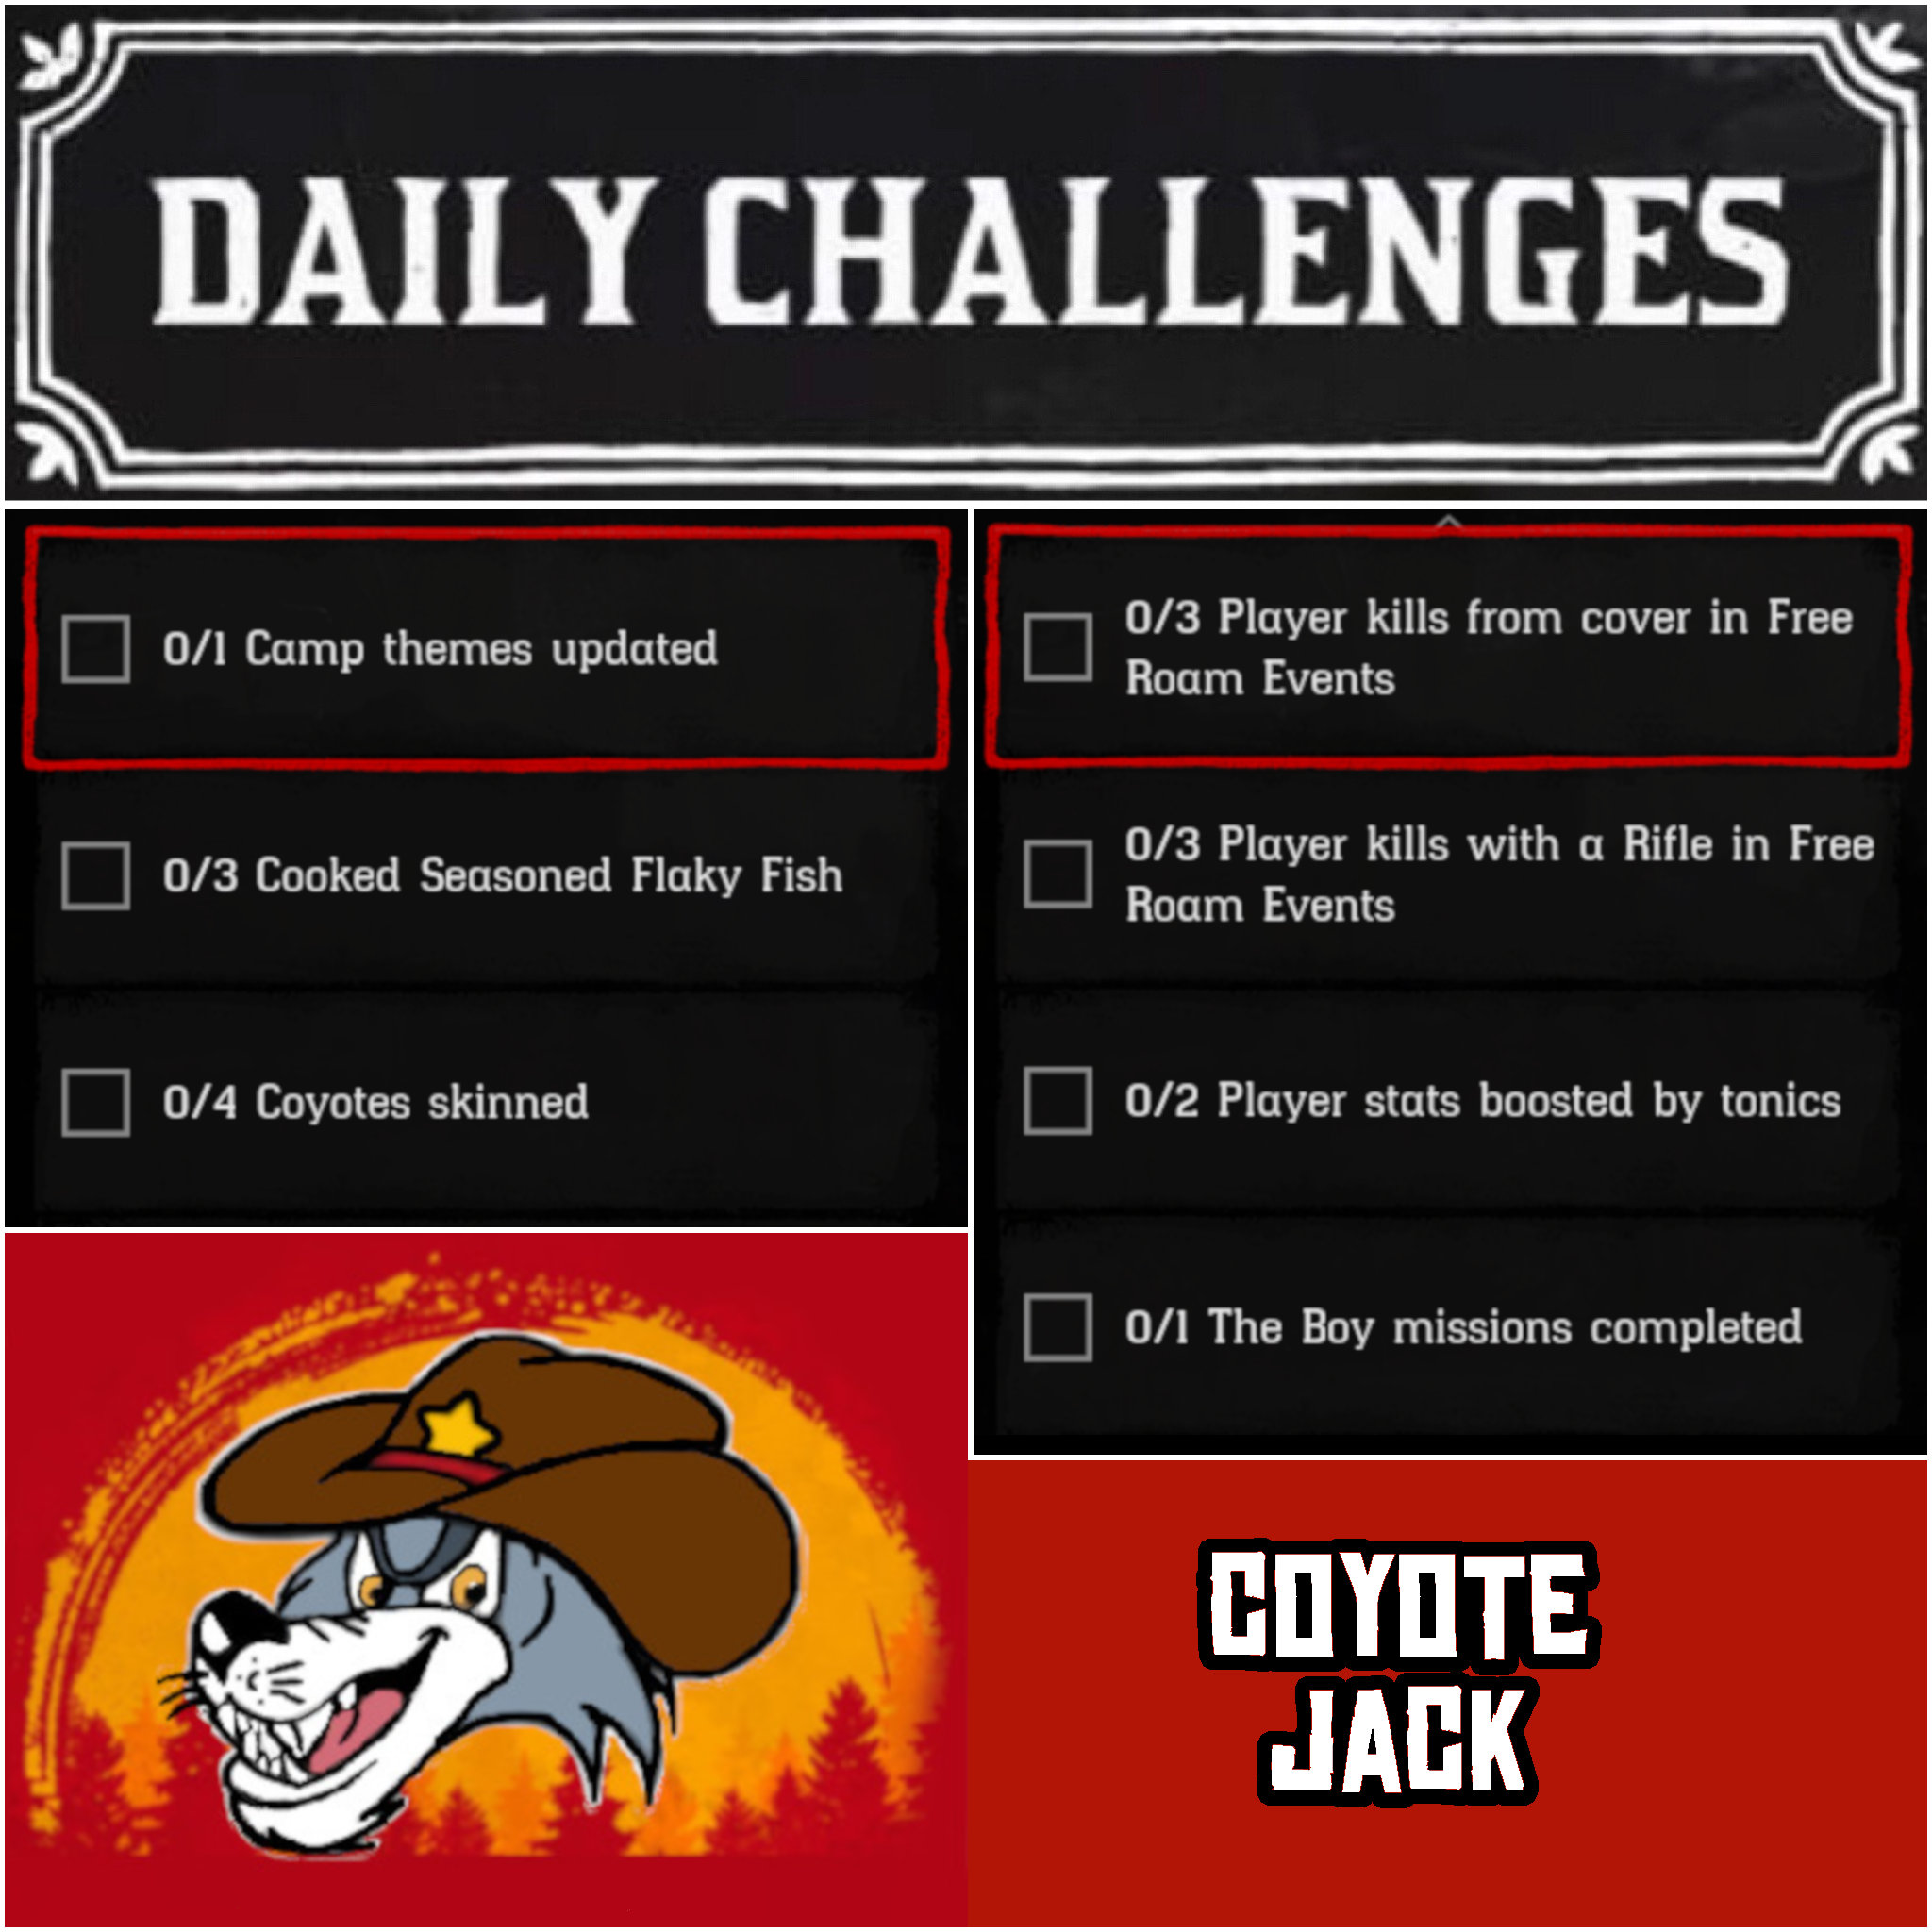 You are currently viewing Monday 01 February Daily Challenges